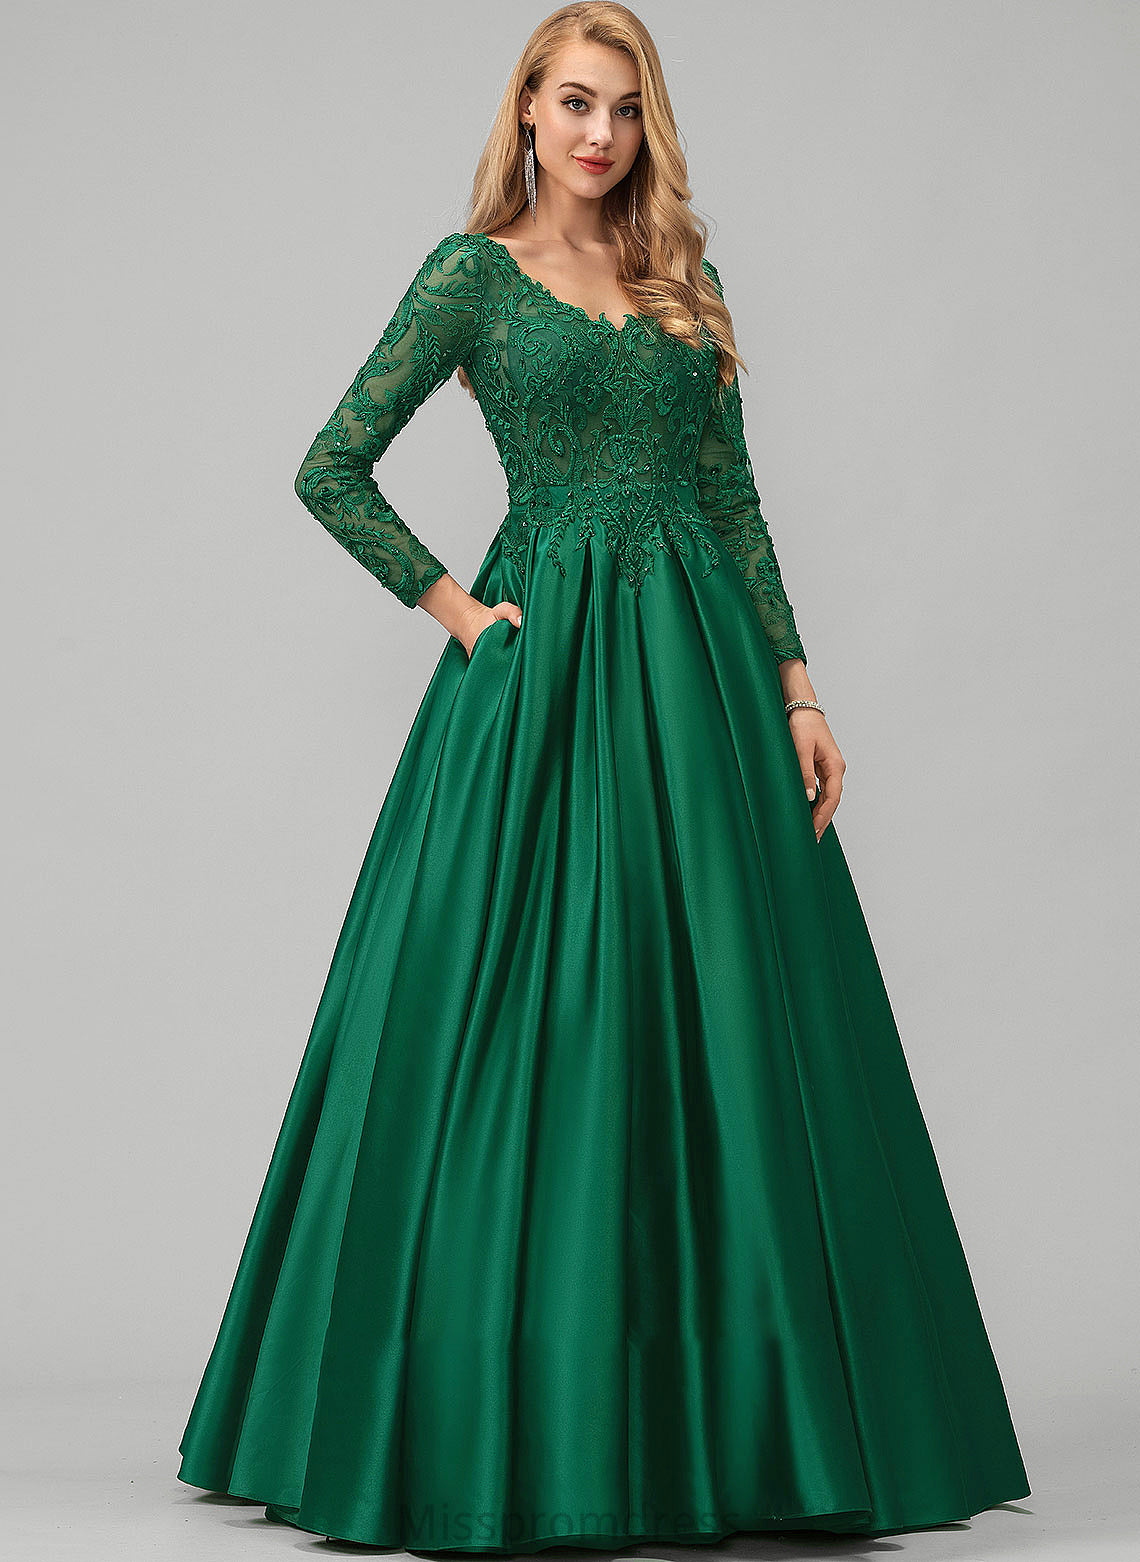 Lace Prom Dresses Beading Satin Floor-Length Pockets V-neck Martina Ball-Gown/Princess Sequins With